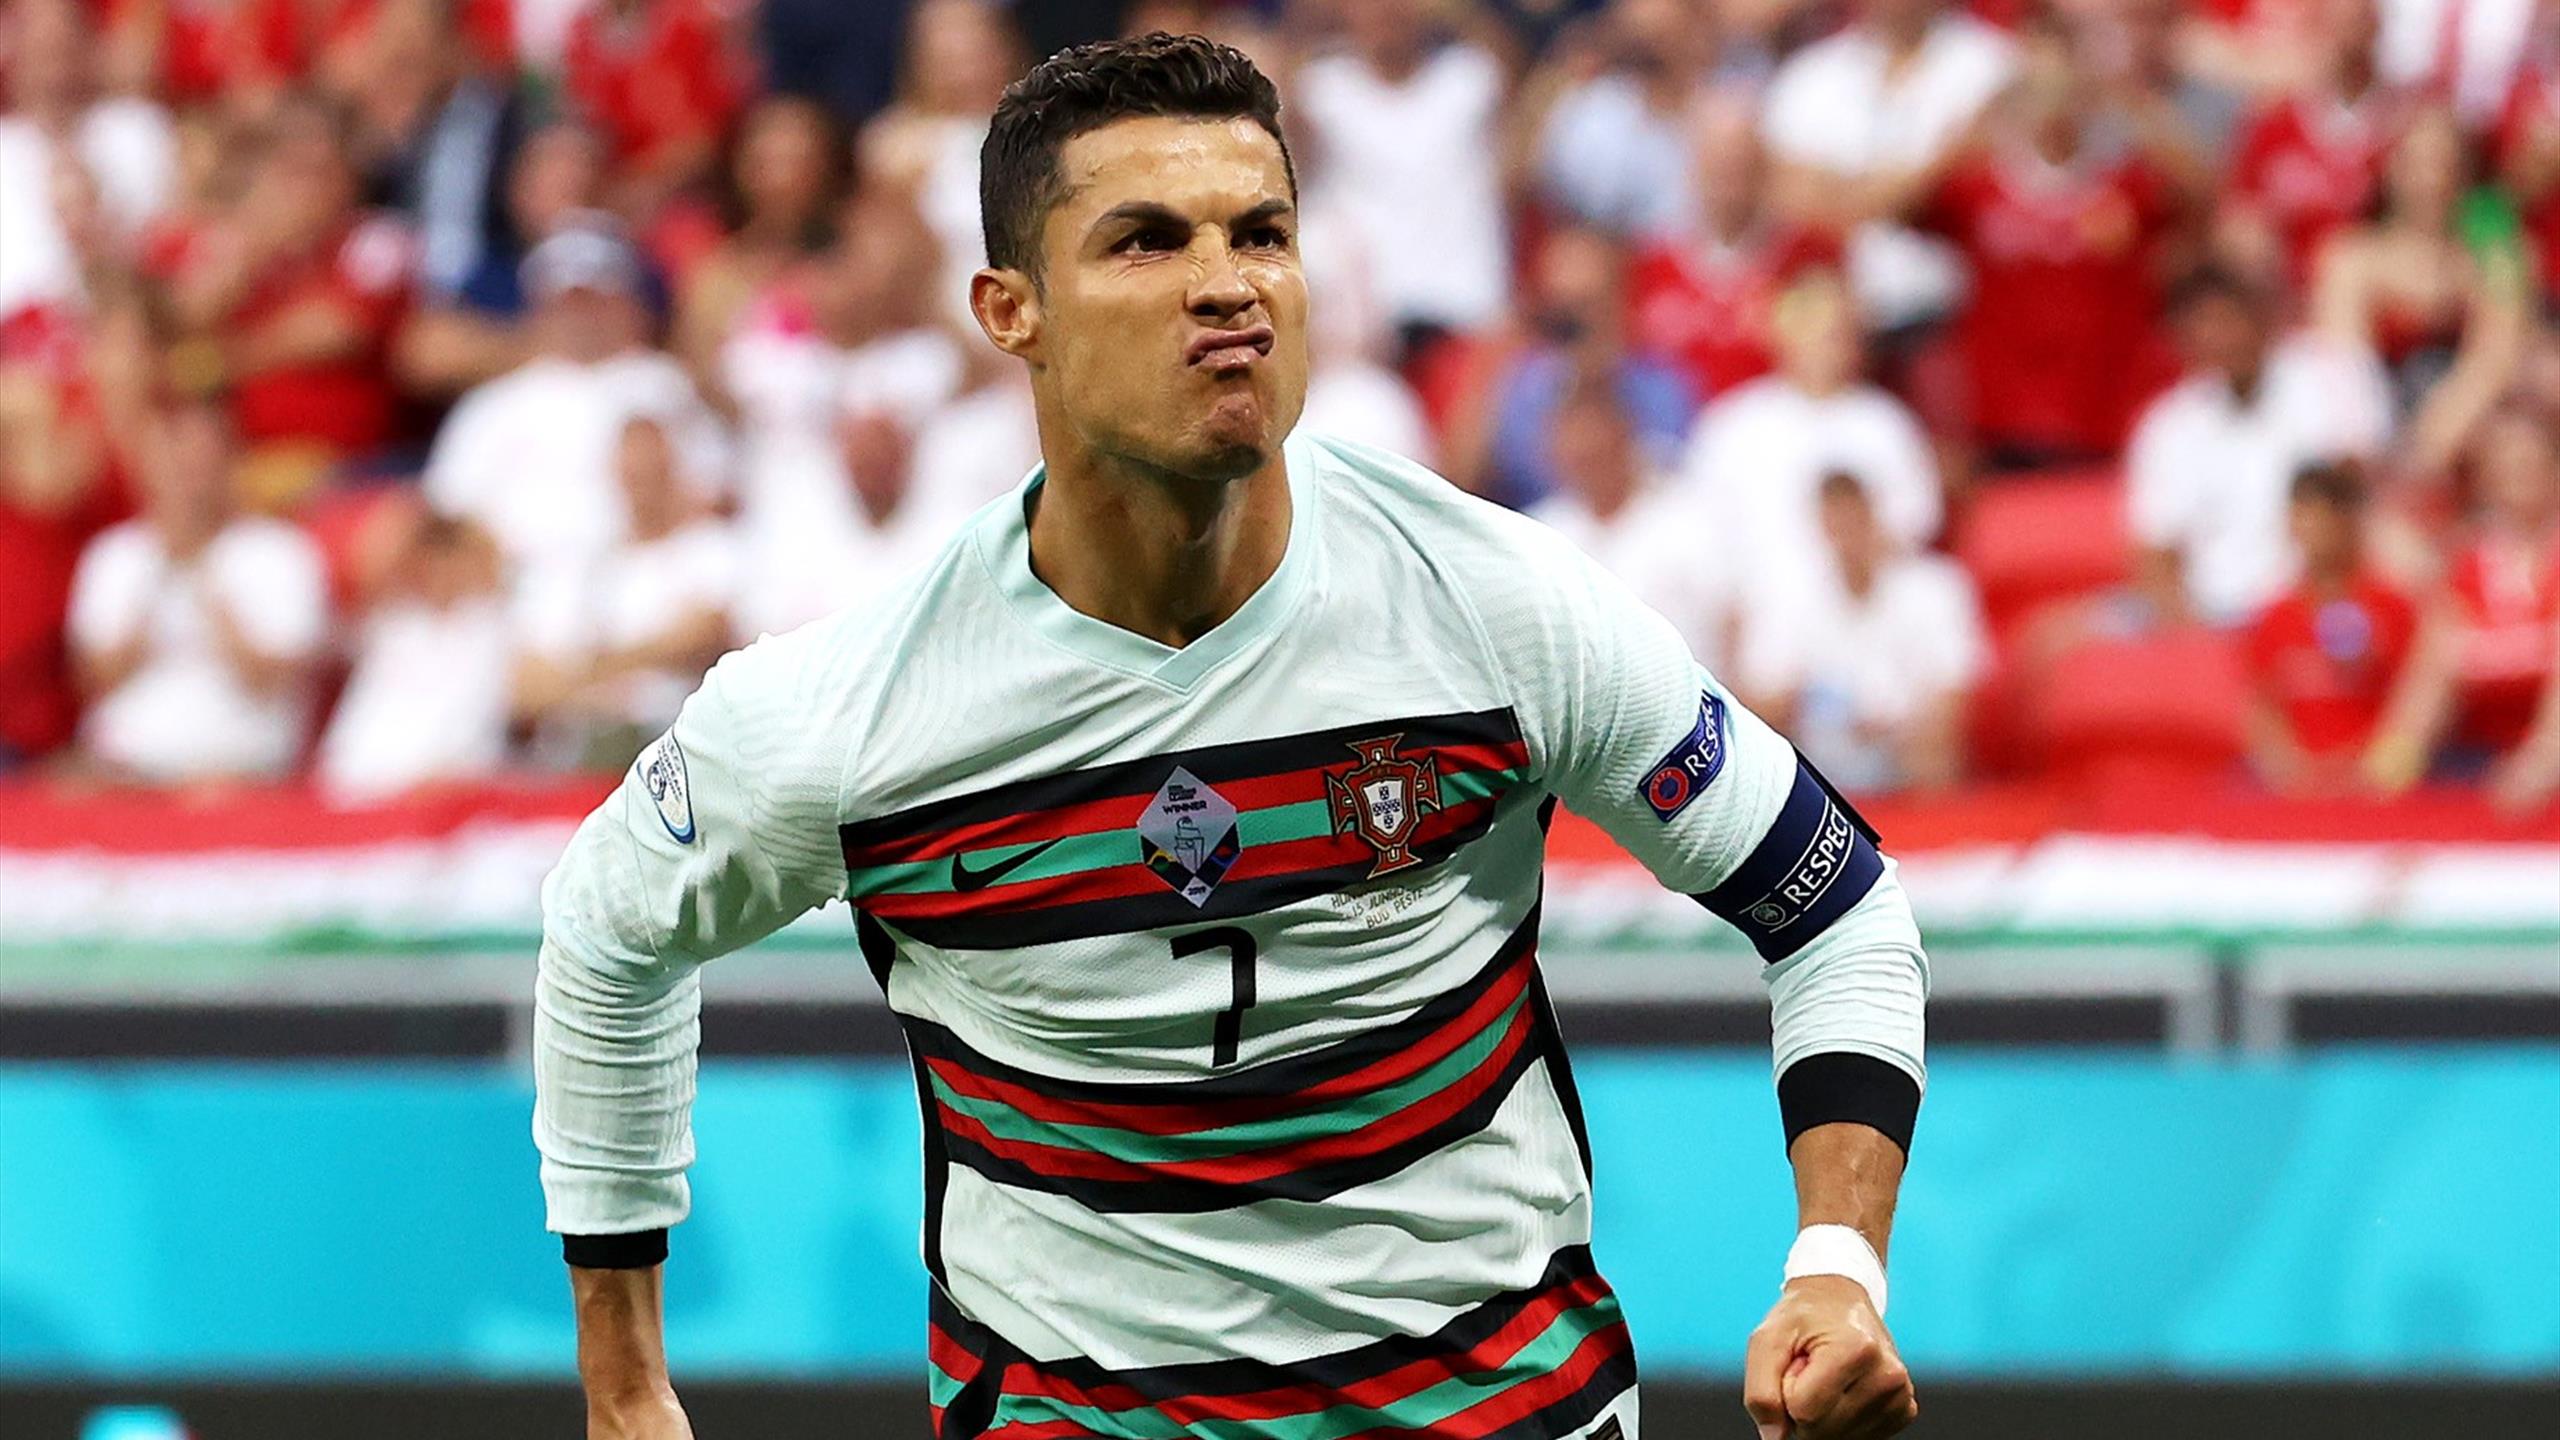 Cristiano Ronaldo becomes top scorer in European Championship history with 11 goals